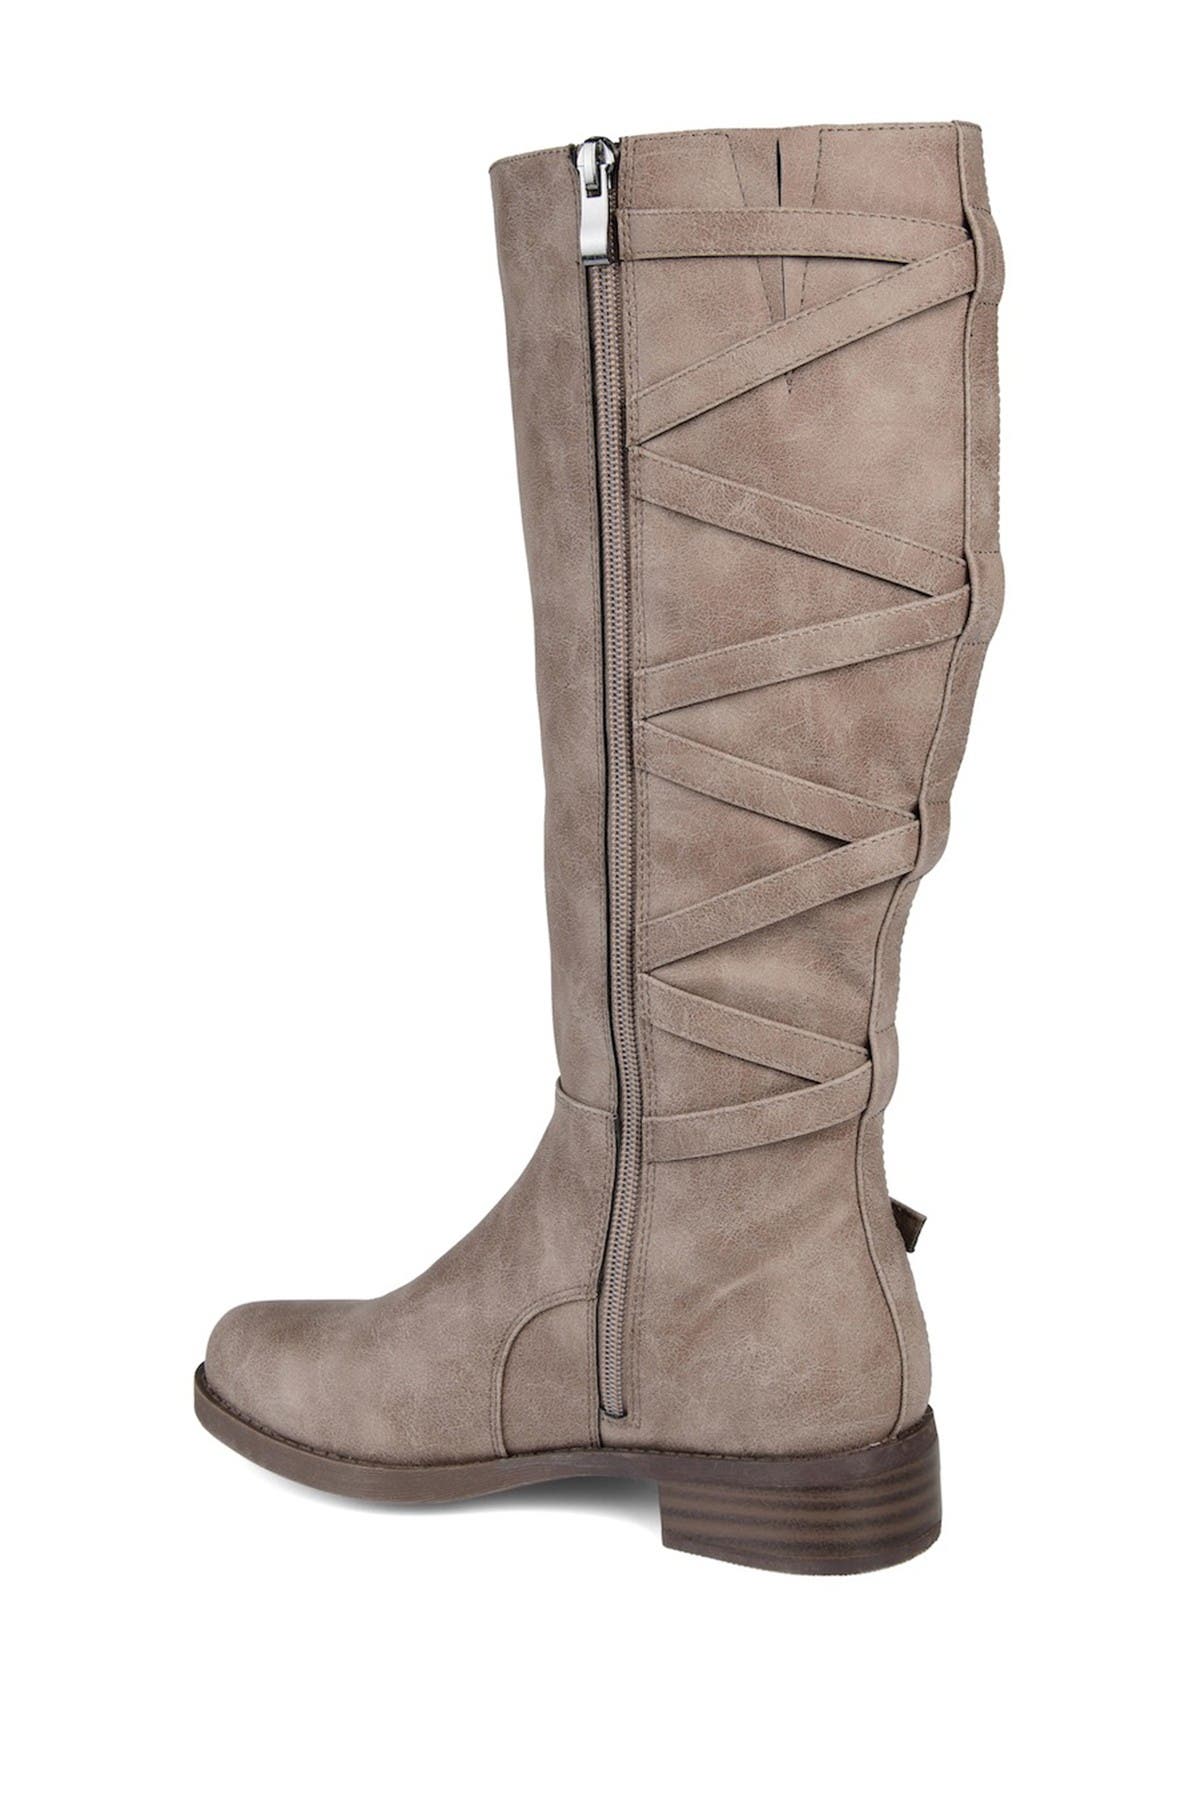 Journee Collection Carly Lace Back Tall Boot In Medium Beige